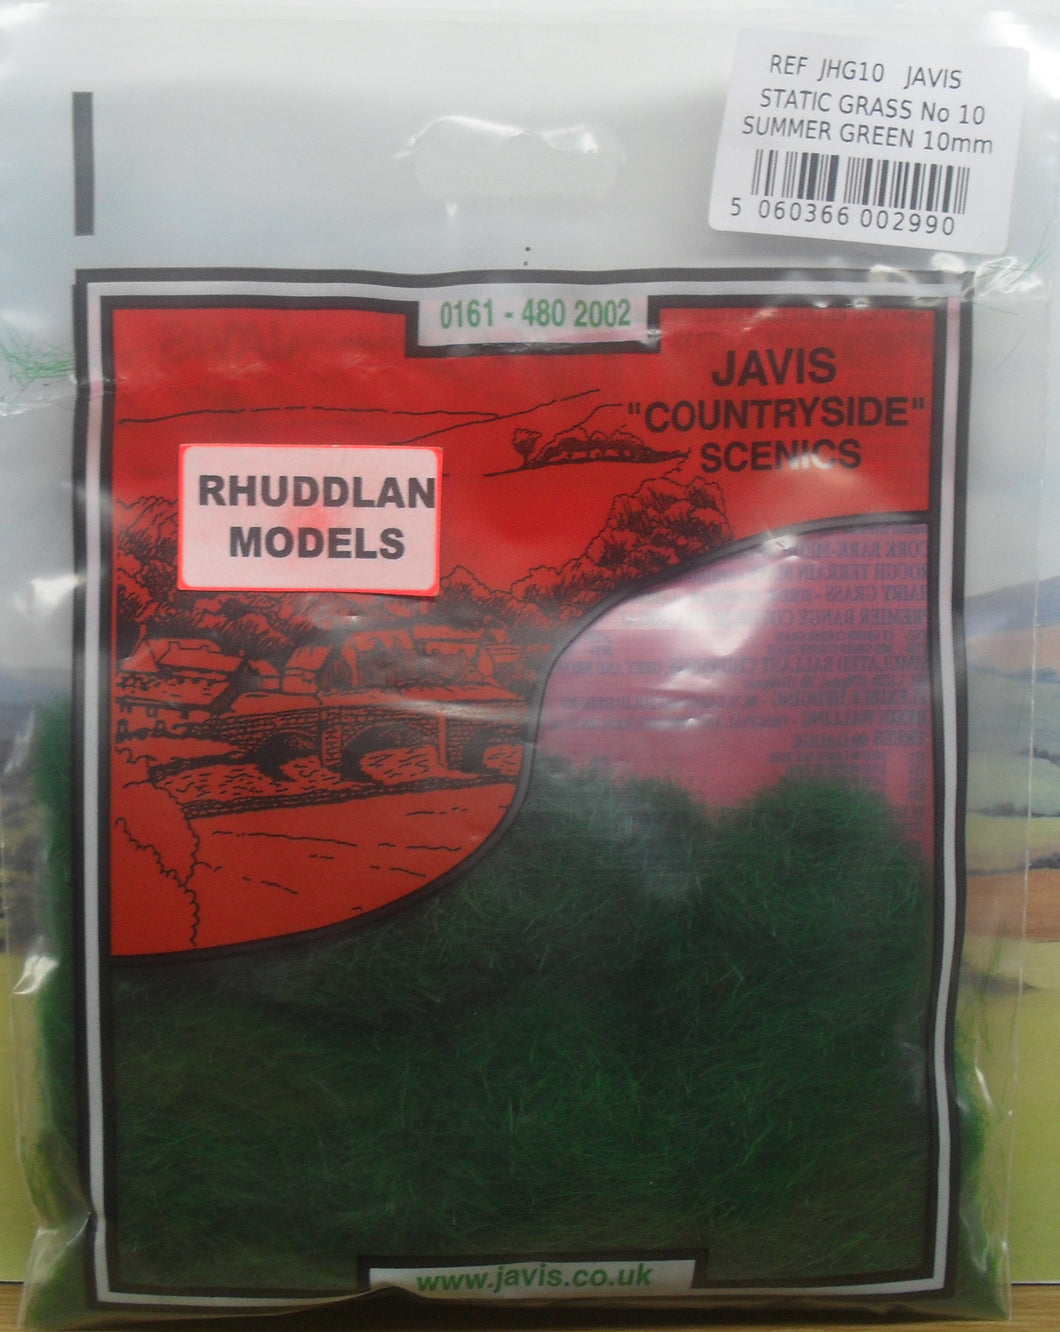 JAVIS REF JHG10 STATIC GRASS NO.10 SUMMER GREEN 10MM - (PRICE INCLUDES DELIVERY)